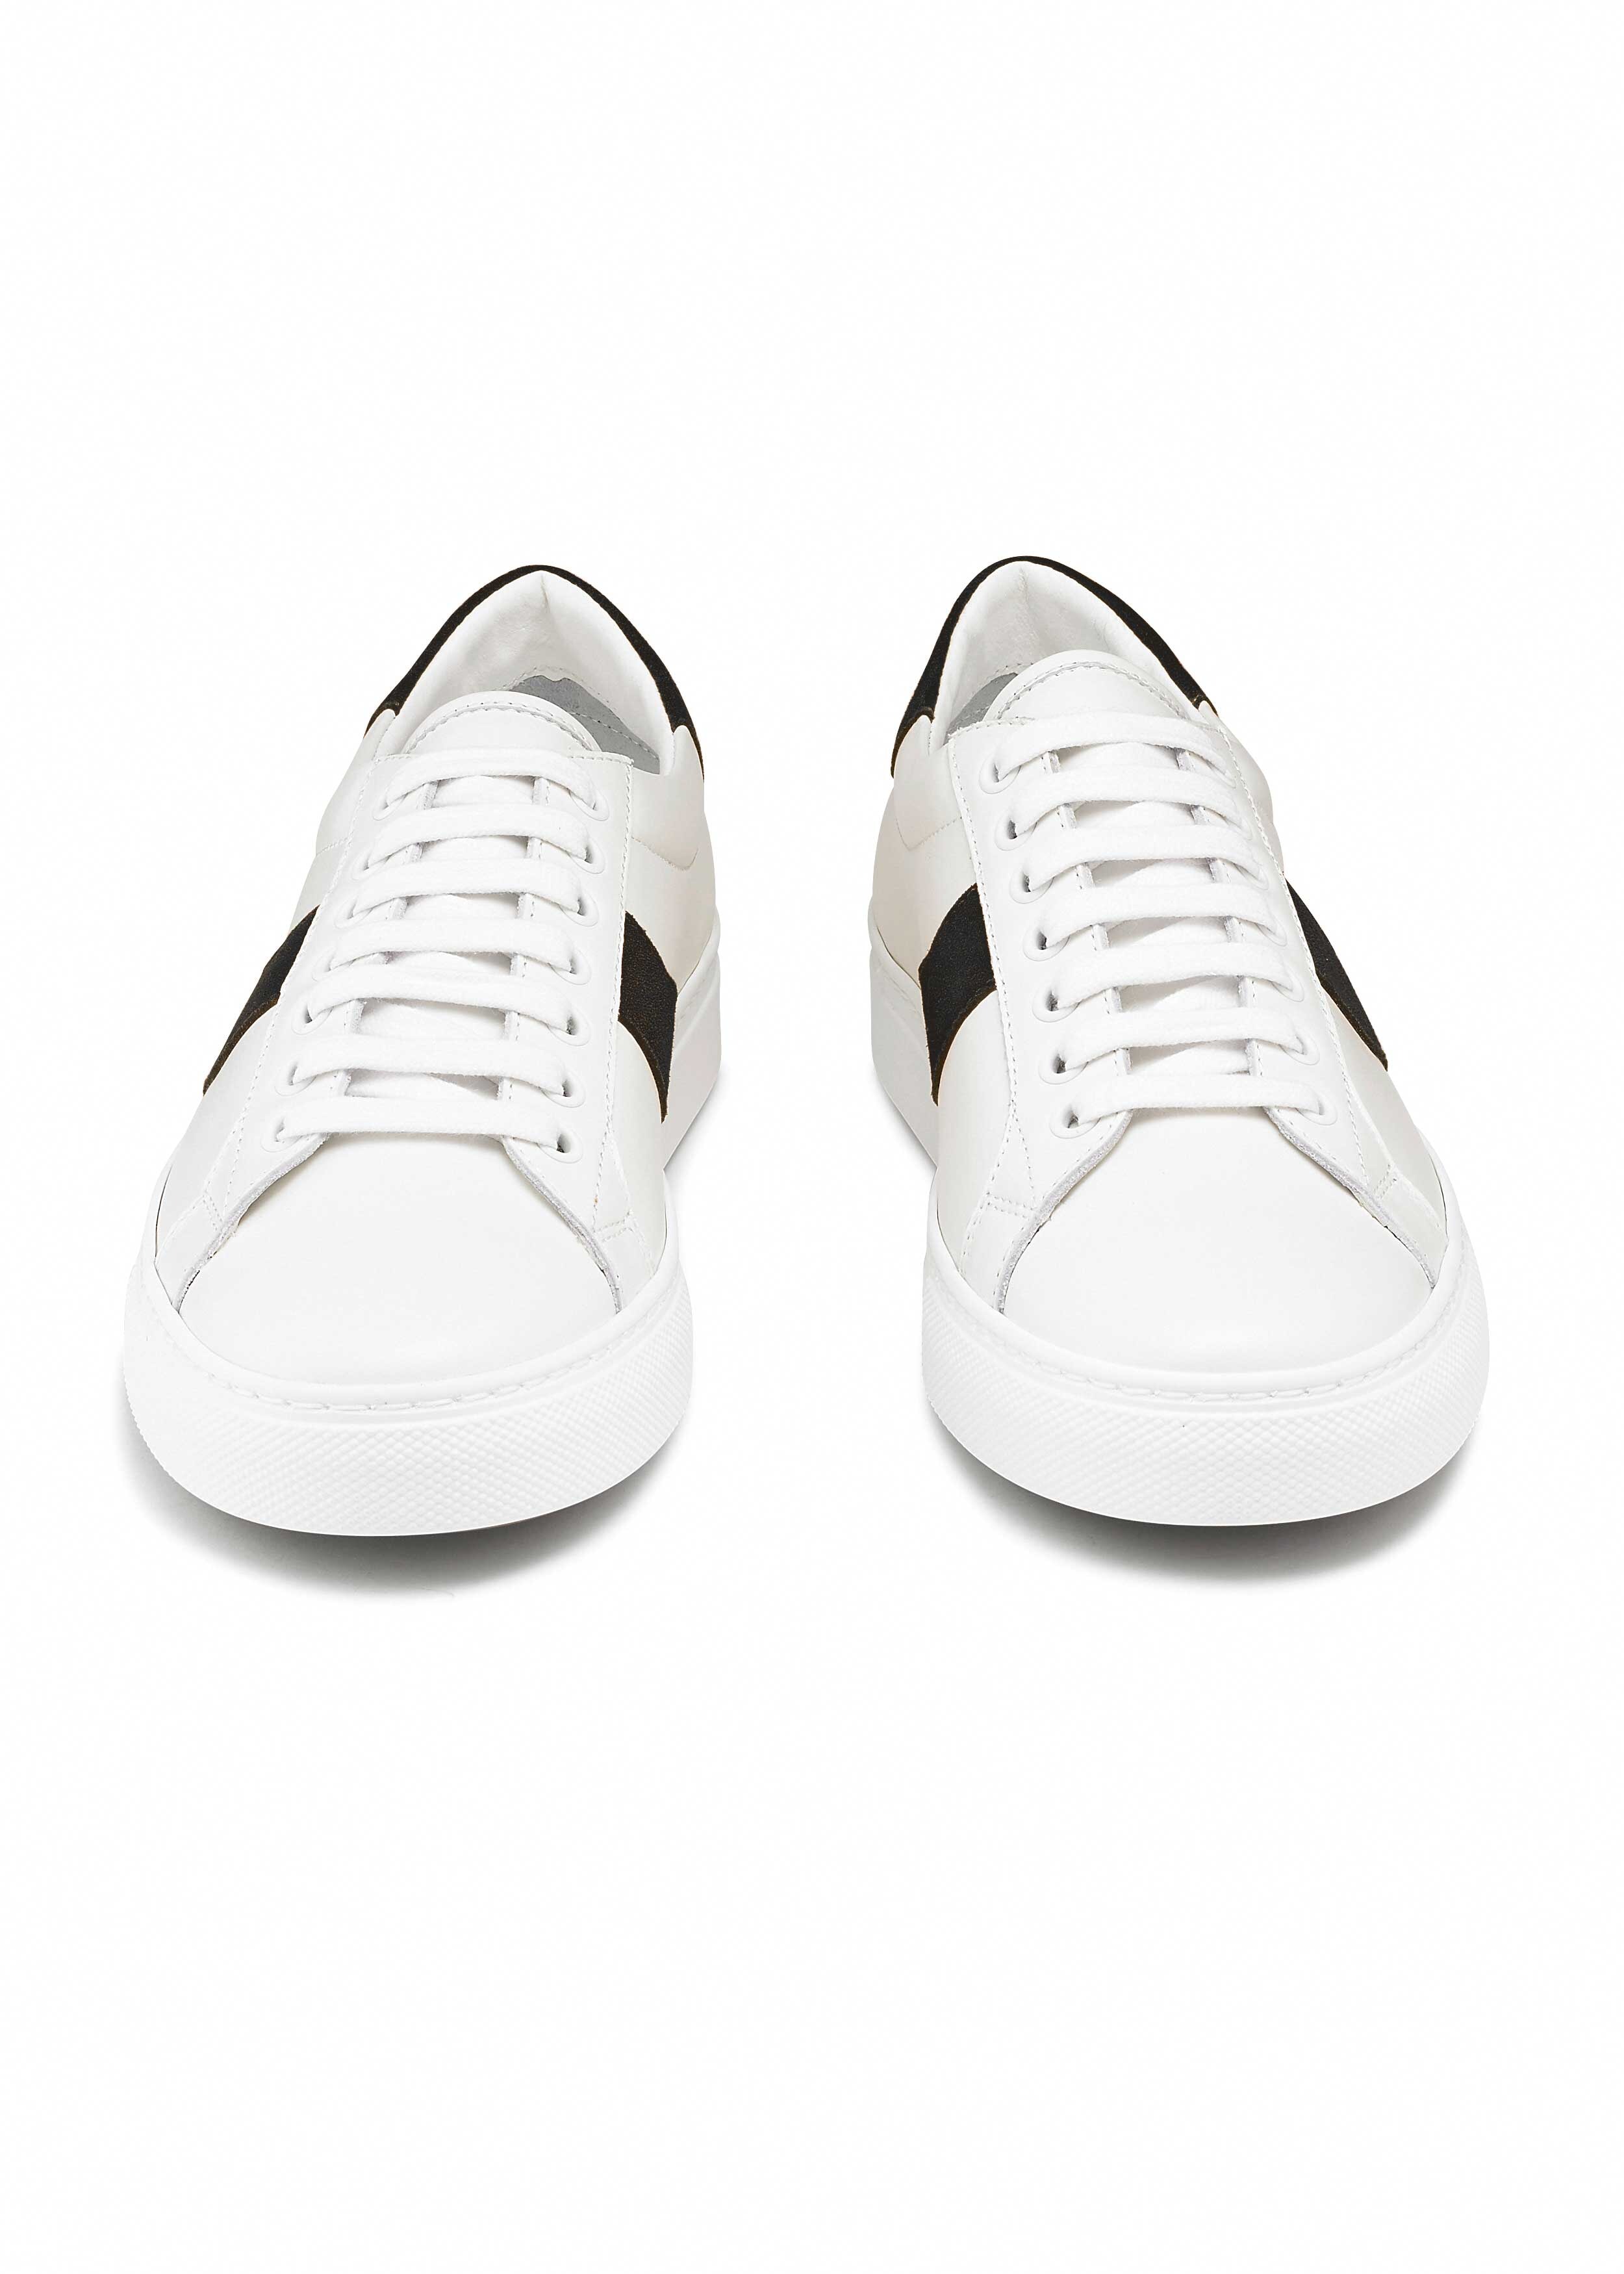 Leather Sneaker White/Black Suede